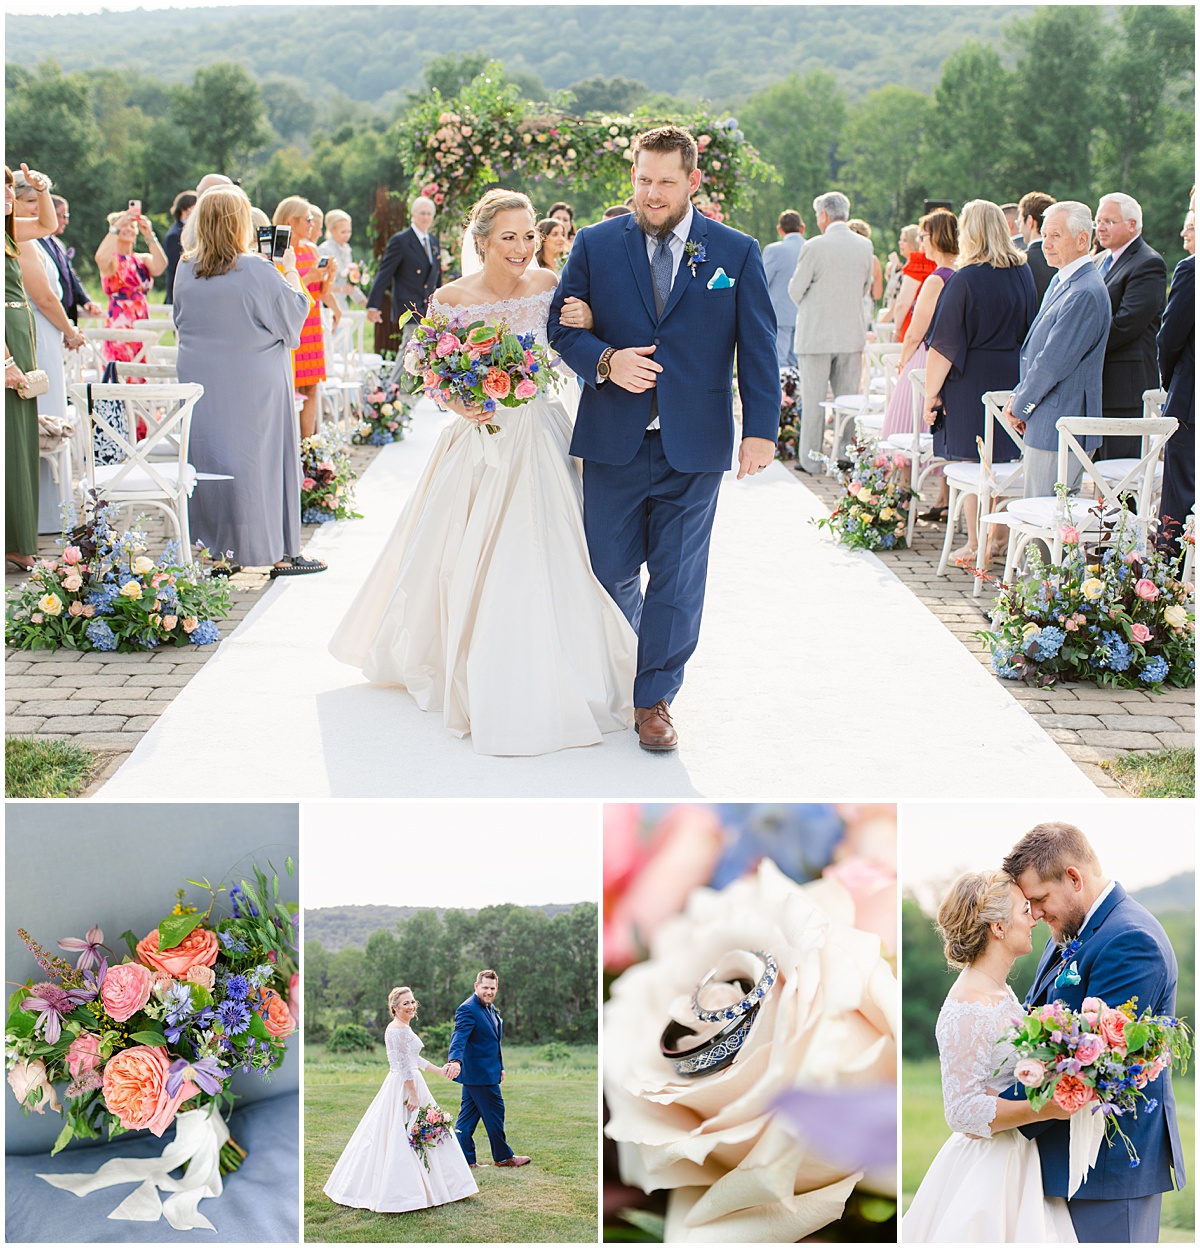 A Colorful outdoor Summer wedding ceremony at Hudson Farm in Andover, New Jersey